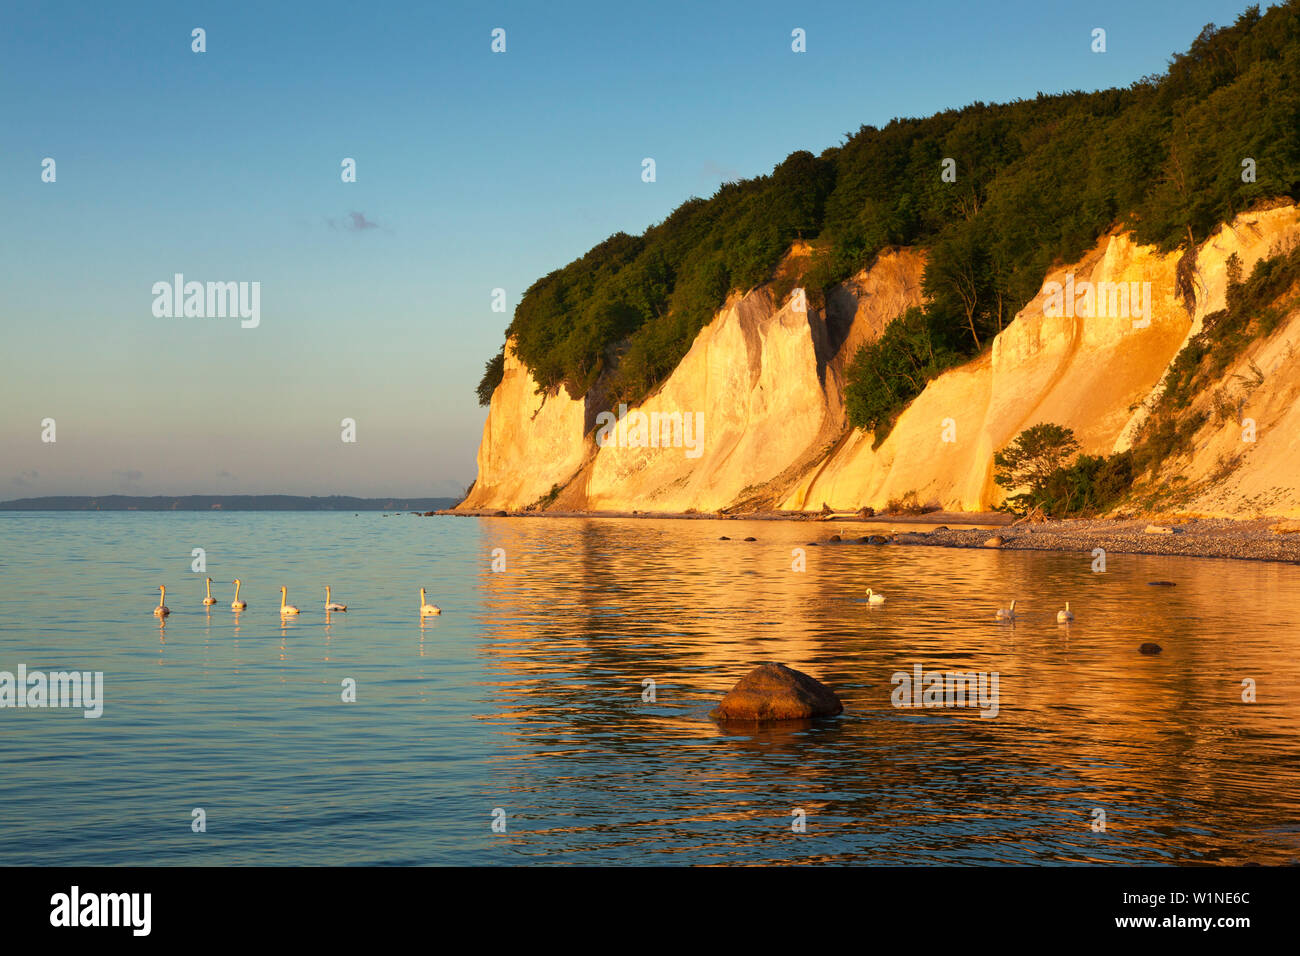 Swans in front of the chalk cliff, National Park Jasmund, Ruegen island, Baltic Sea, Mecklenburg-West Pomerania, Germany Stock Photo